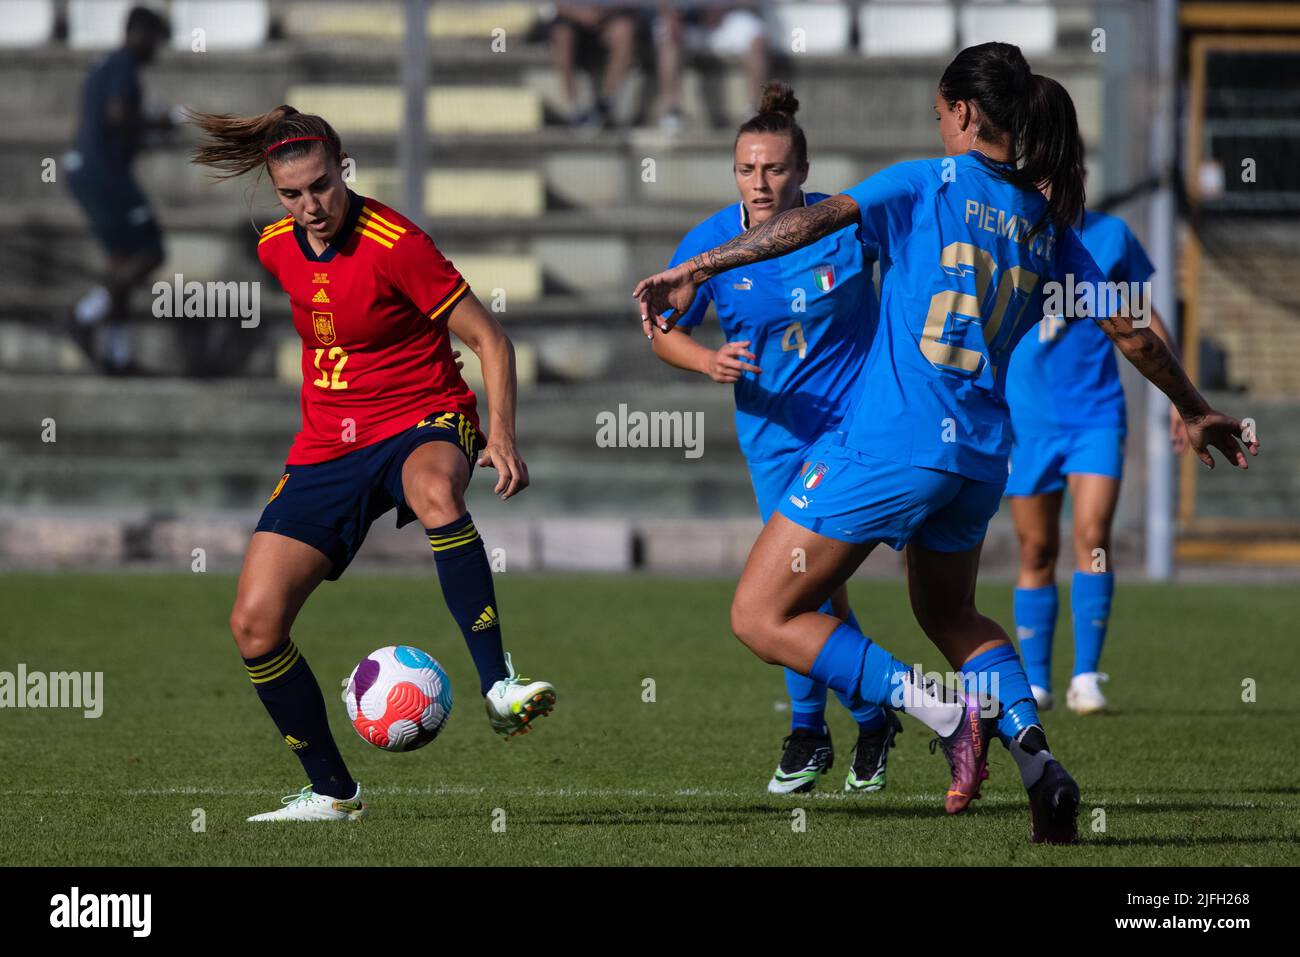 Patricia Guijarro Gutierrez of Spain, Aurora Galli, Martina Piemonte of Italy compete for the ball during the Women's International friendly match between Italy and Spain at Teofilo Patini Stadium on July 01, 2022 in Castel di Sangro , Italy. Â©Photo: Cinzia Camela. Stock Photo